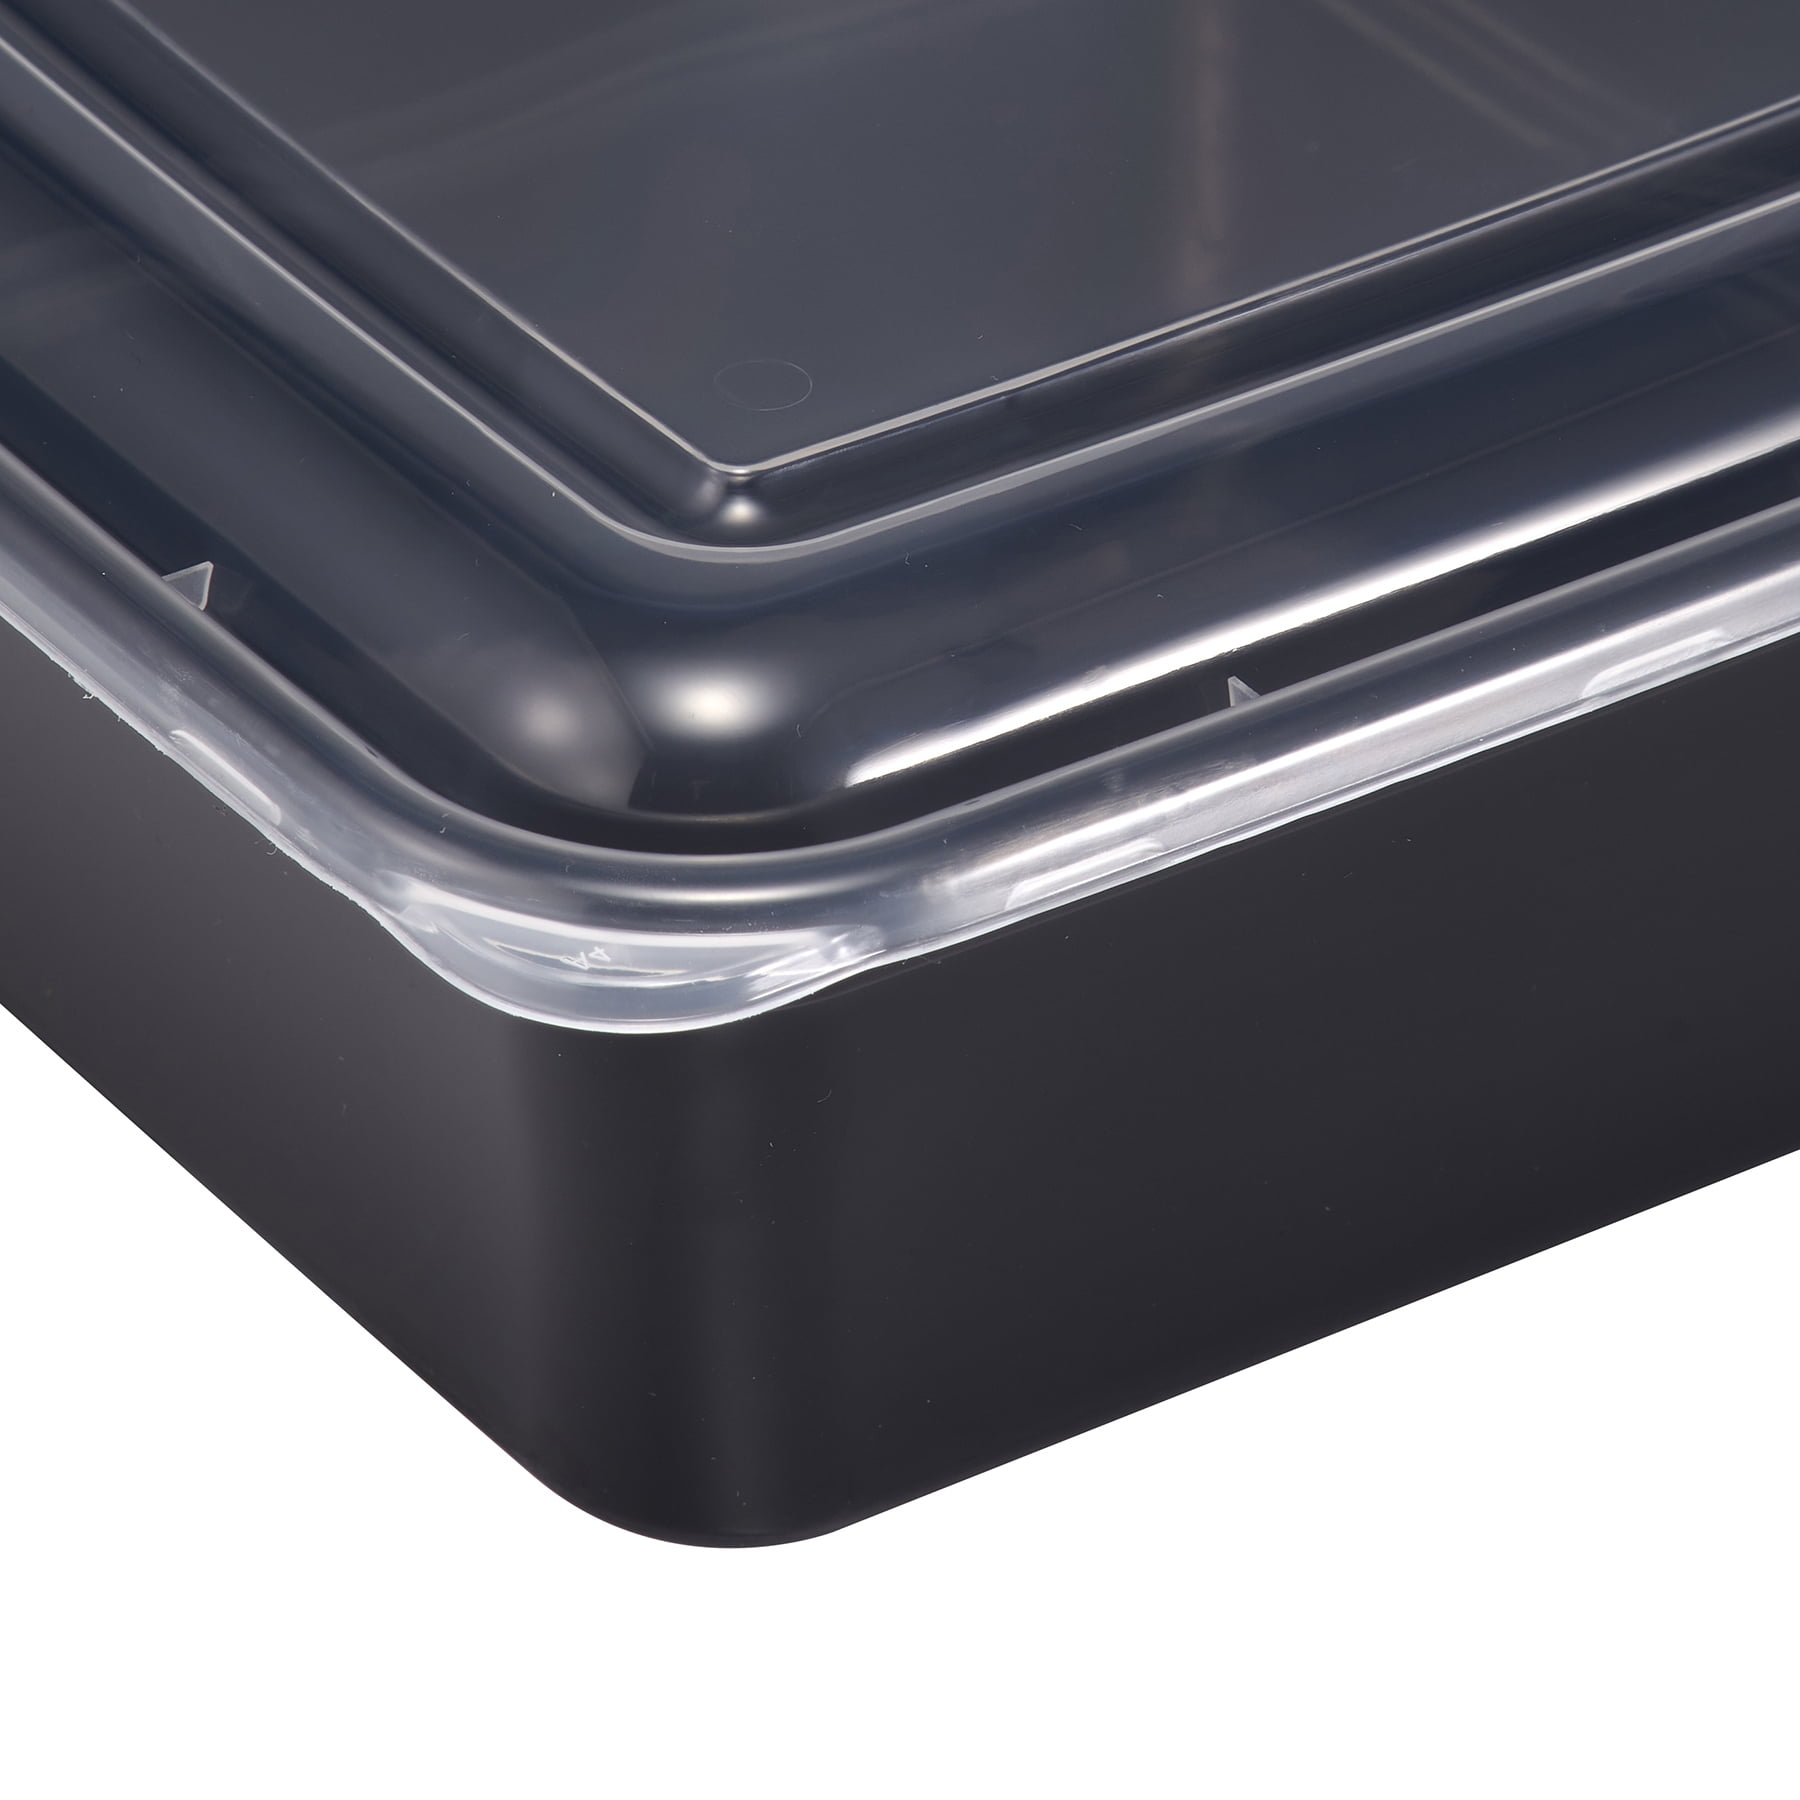 8 CP Meal Tray with Lid (Black) – Gagan Traders